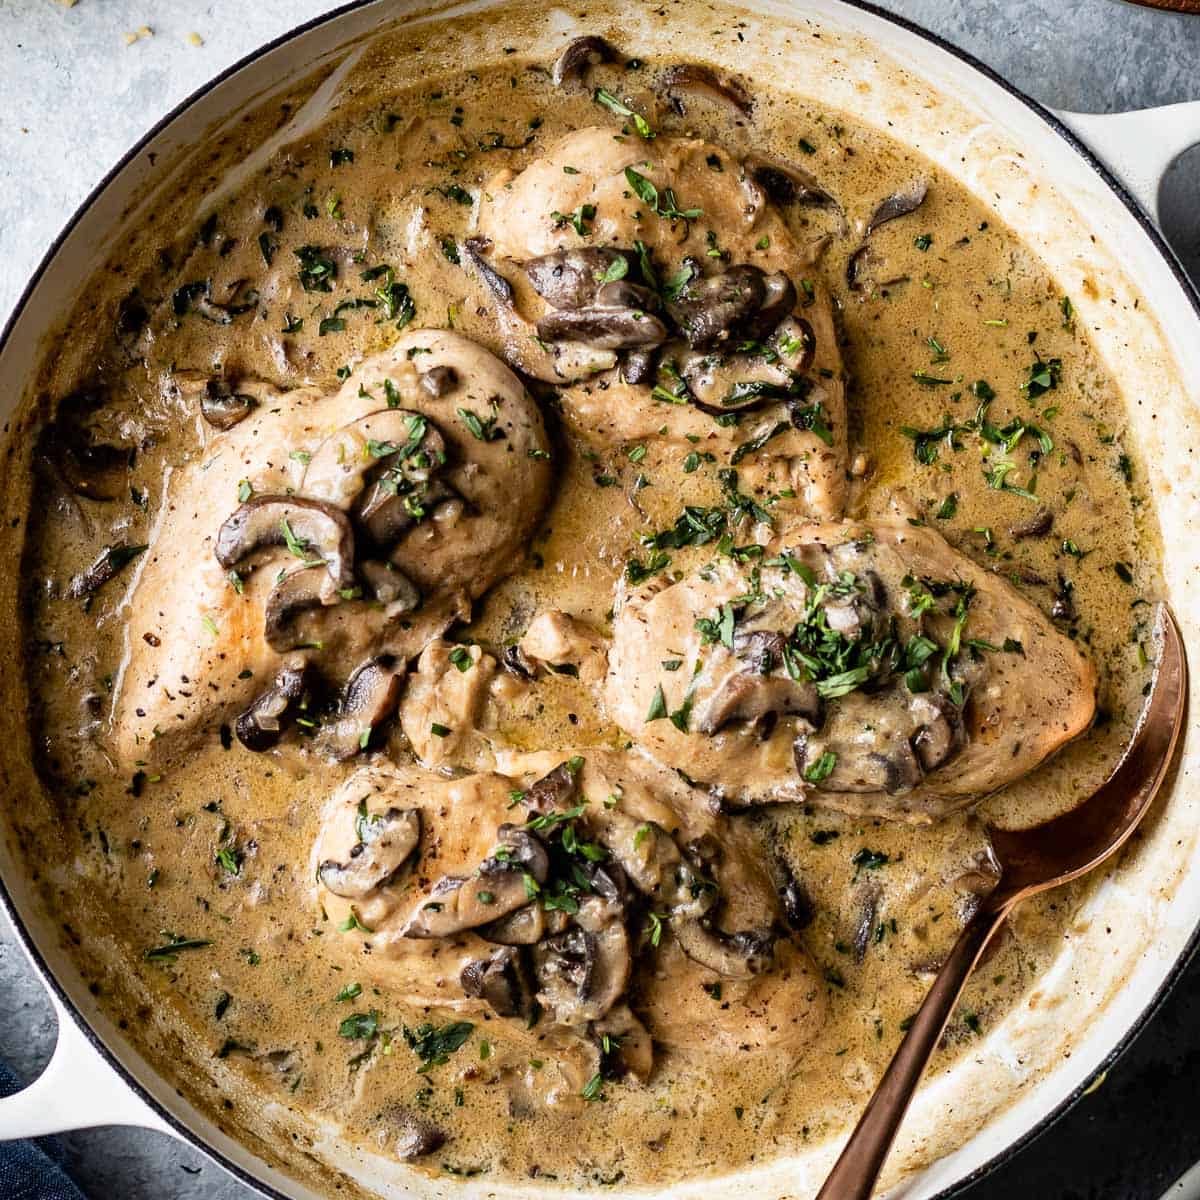 https://foolproofliving.com/wp-content/uploads/2019/03/Chicken-Fricassee-Frenh-Stew.jpg